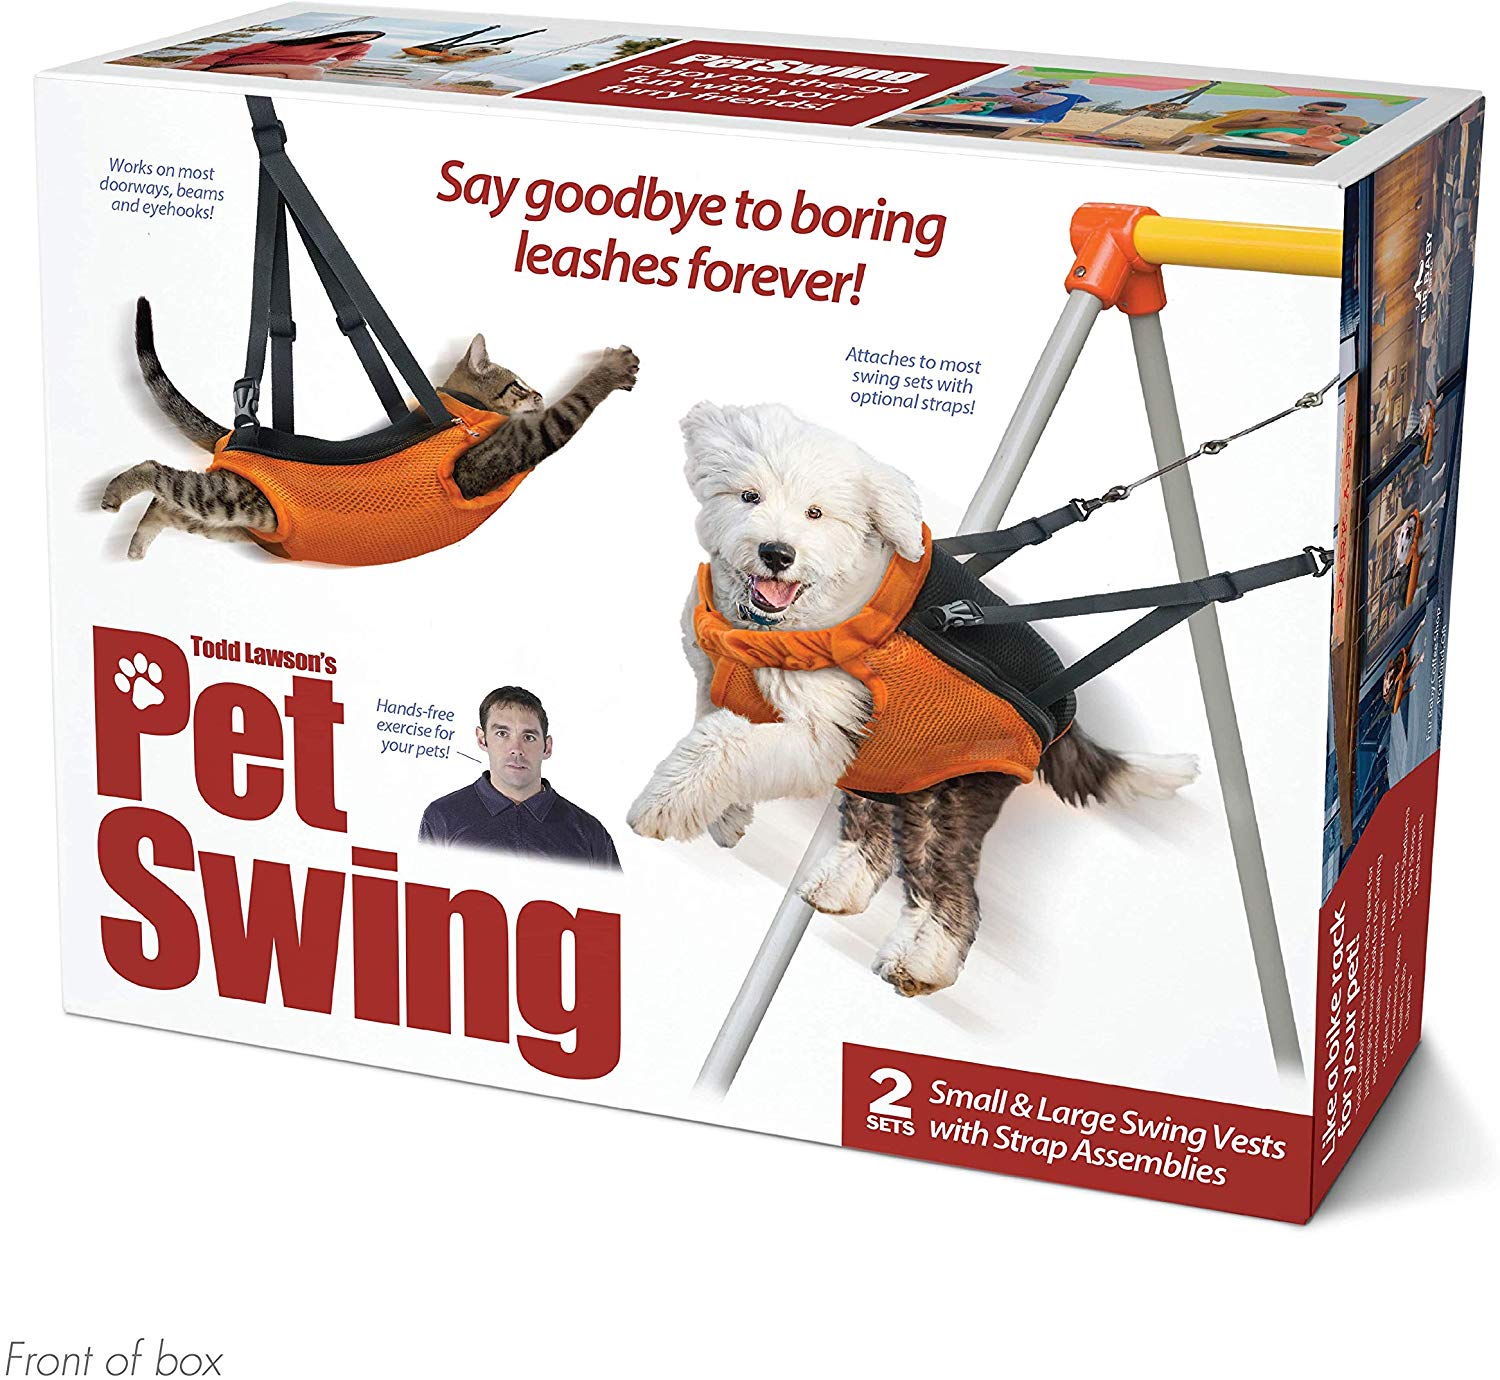 Prank Pack “Pet Swing” - Wrap Your Real Gift in a Prank Funny Gag Joke Gift Box